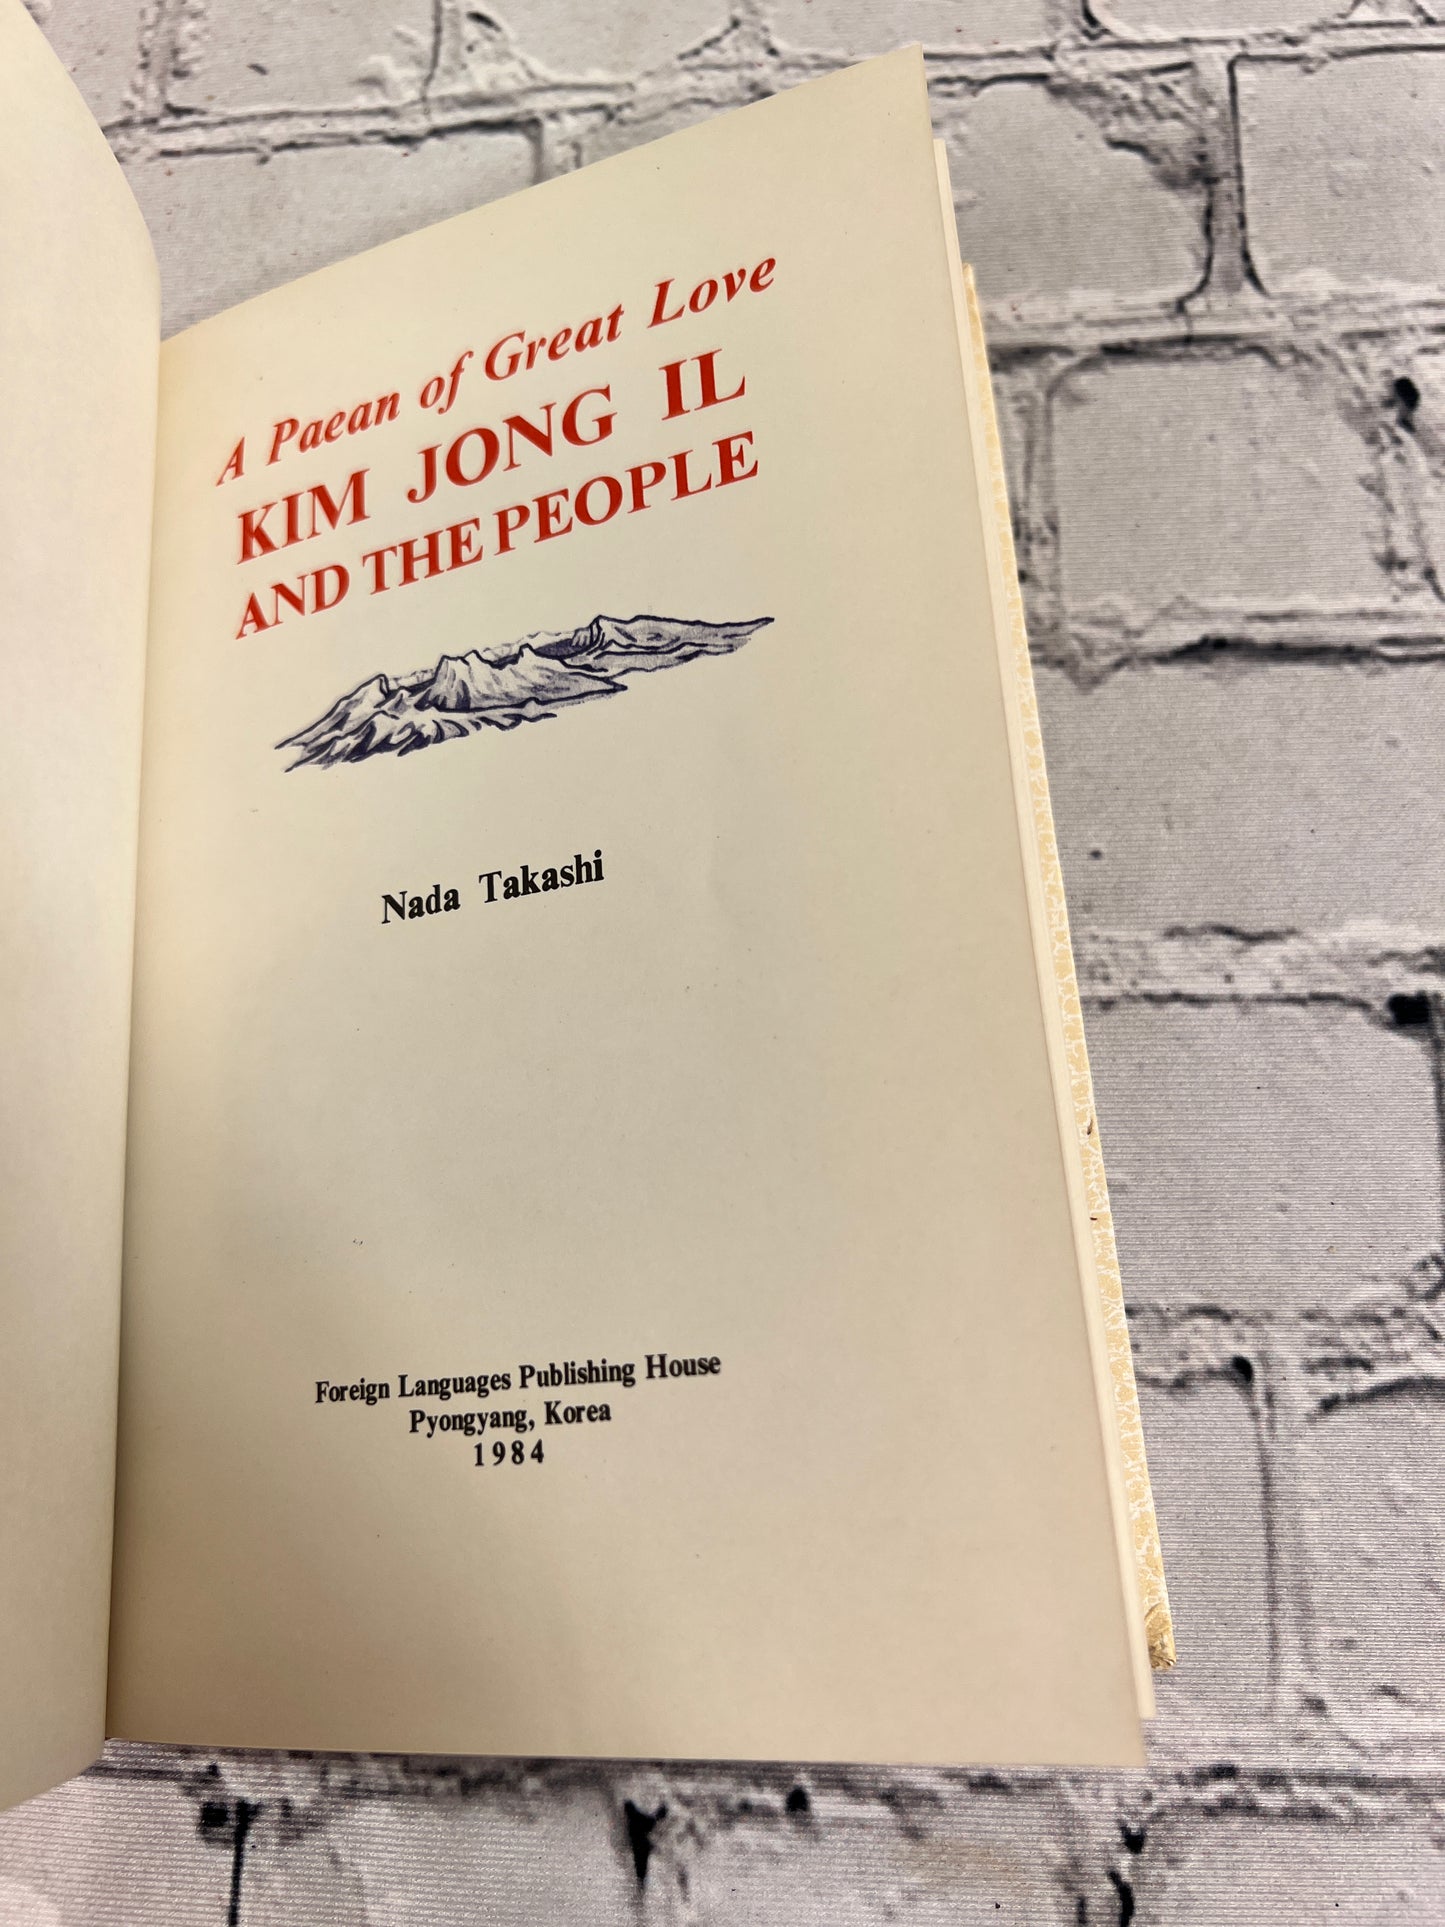 A Paean of Great Love Kim Jong Il and the People by Nada Takashi [1984]